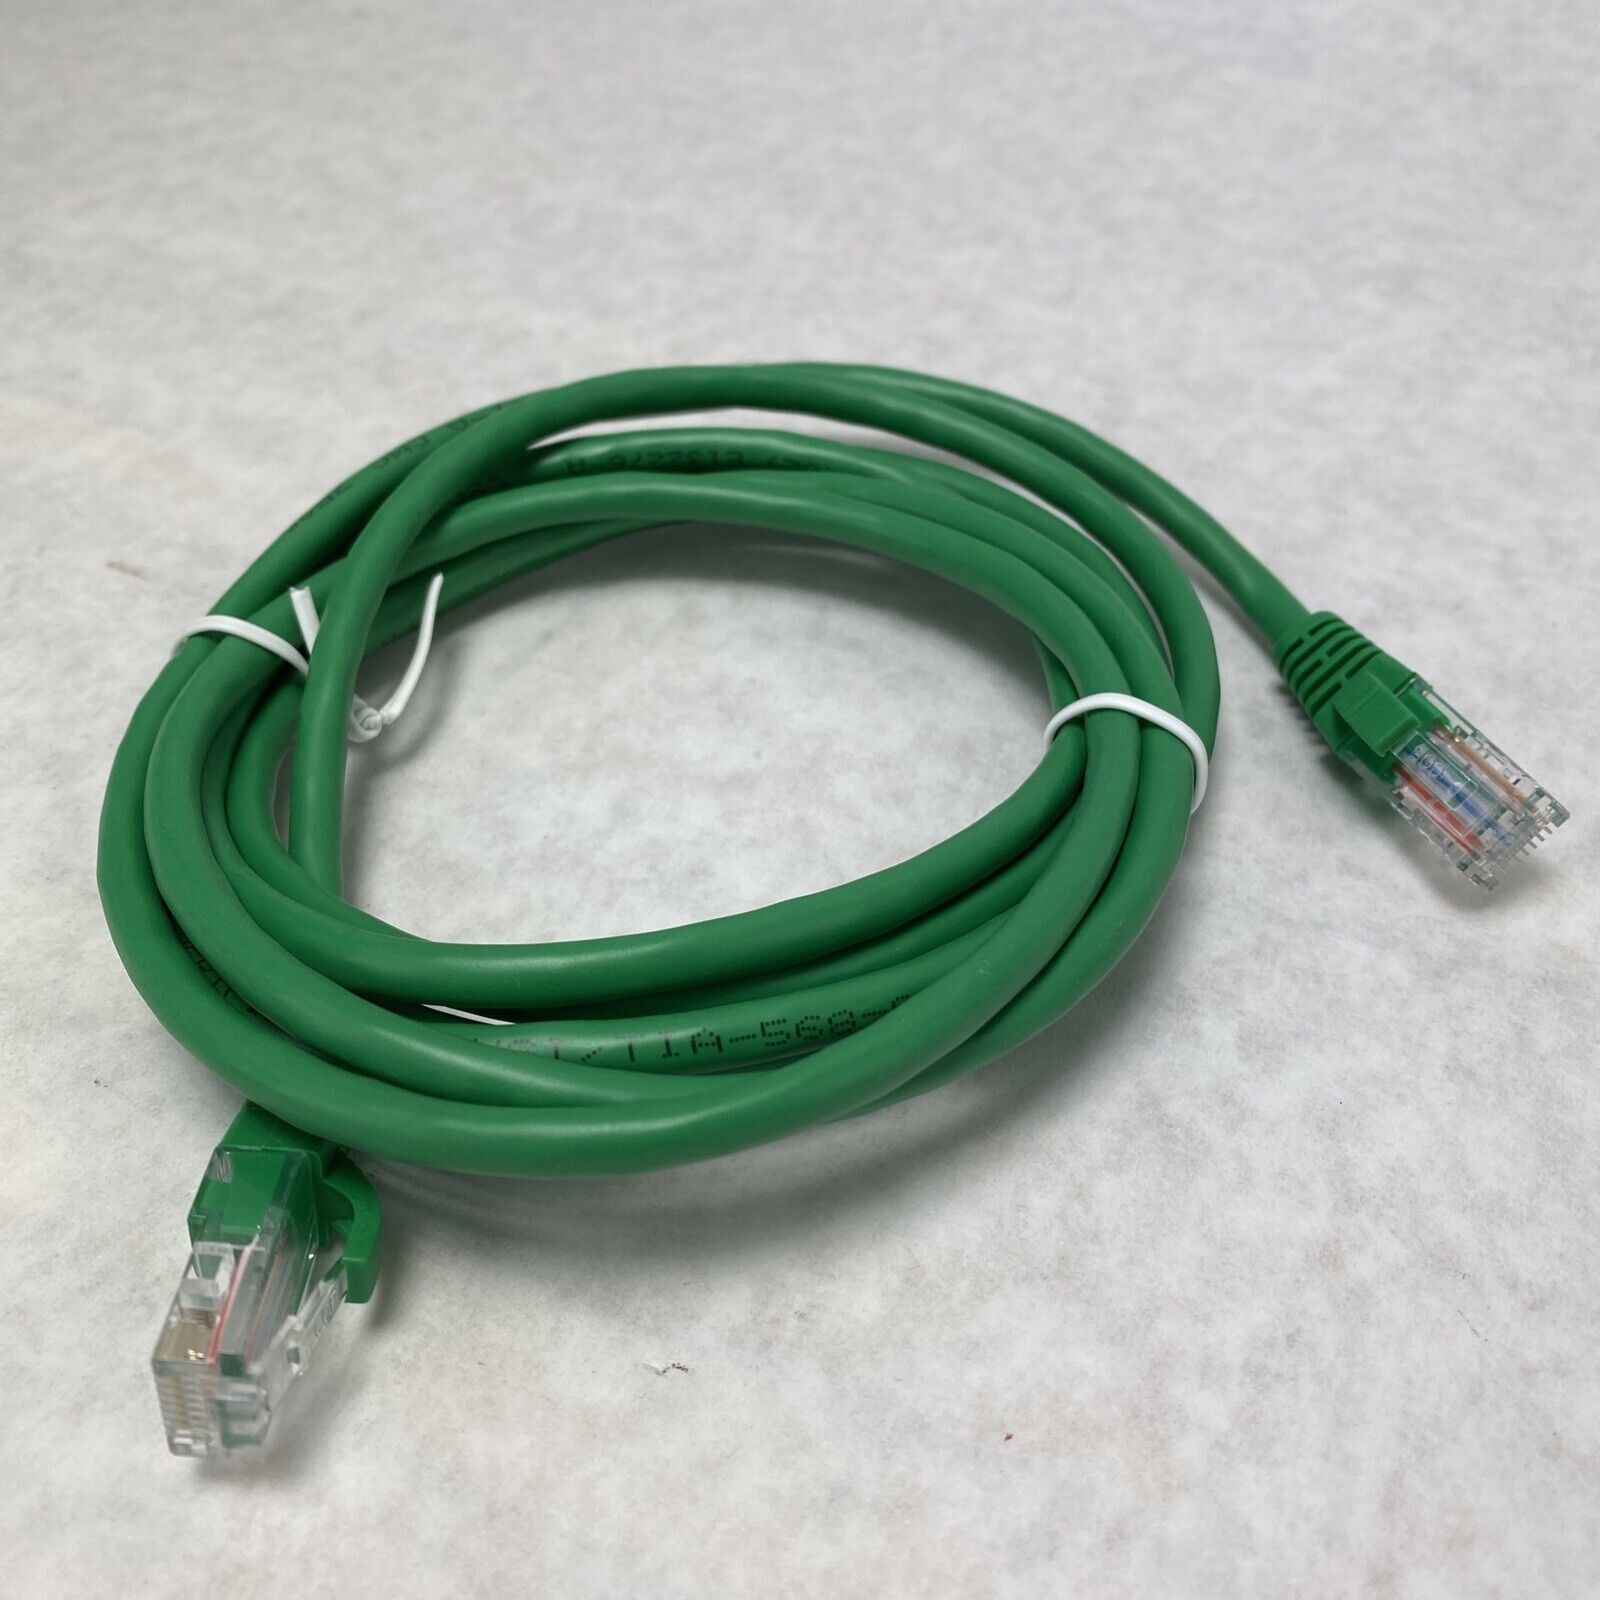 7ft Green Cat5e C2G 15194 Snagless Unshielded UTP Ethernet Patch Cable